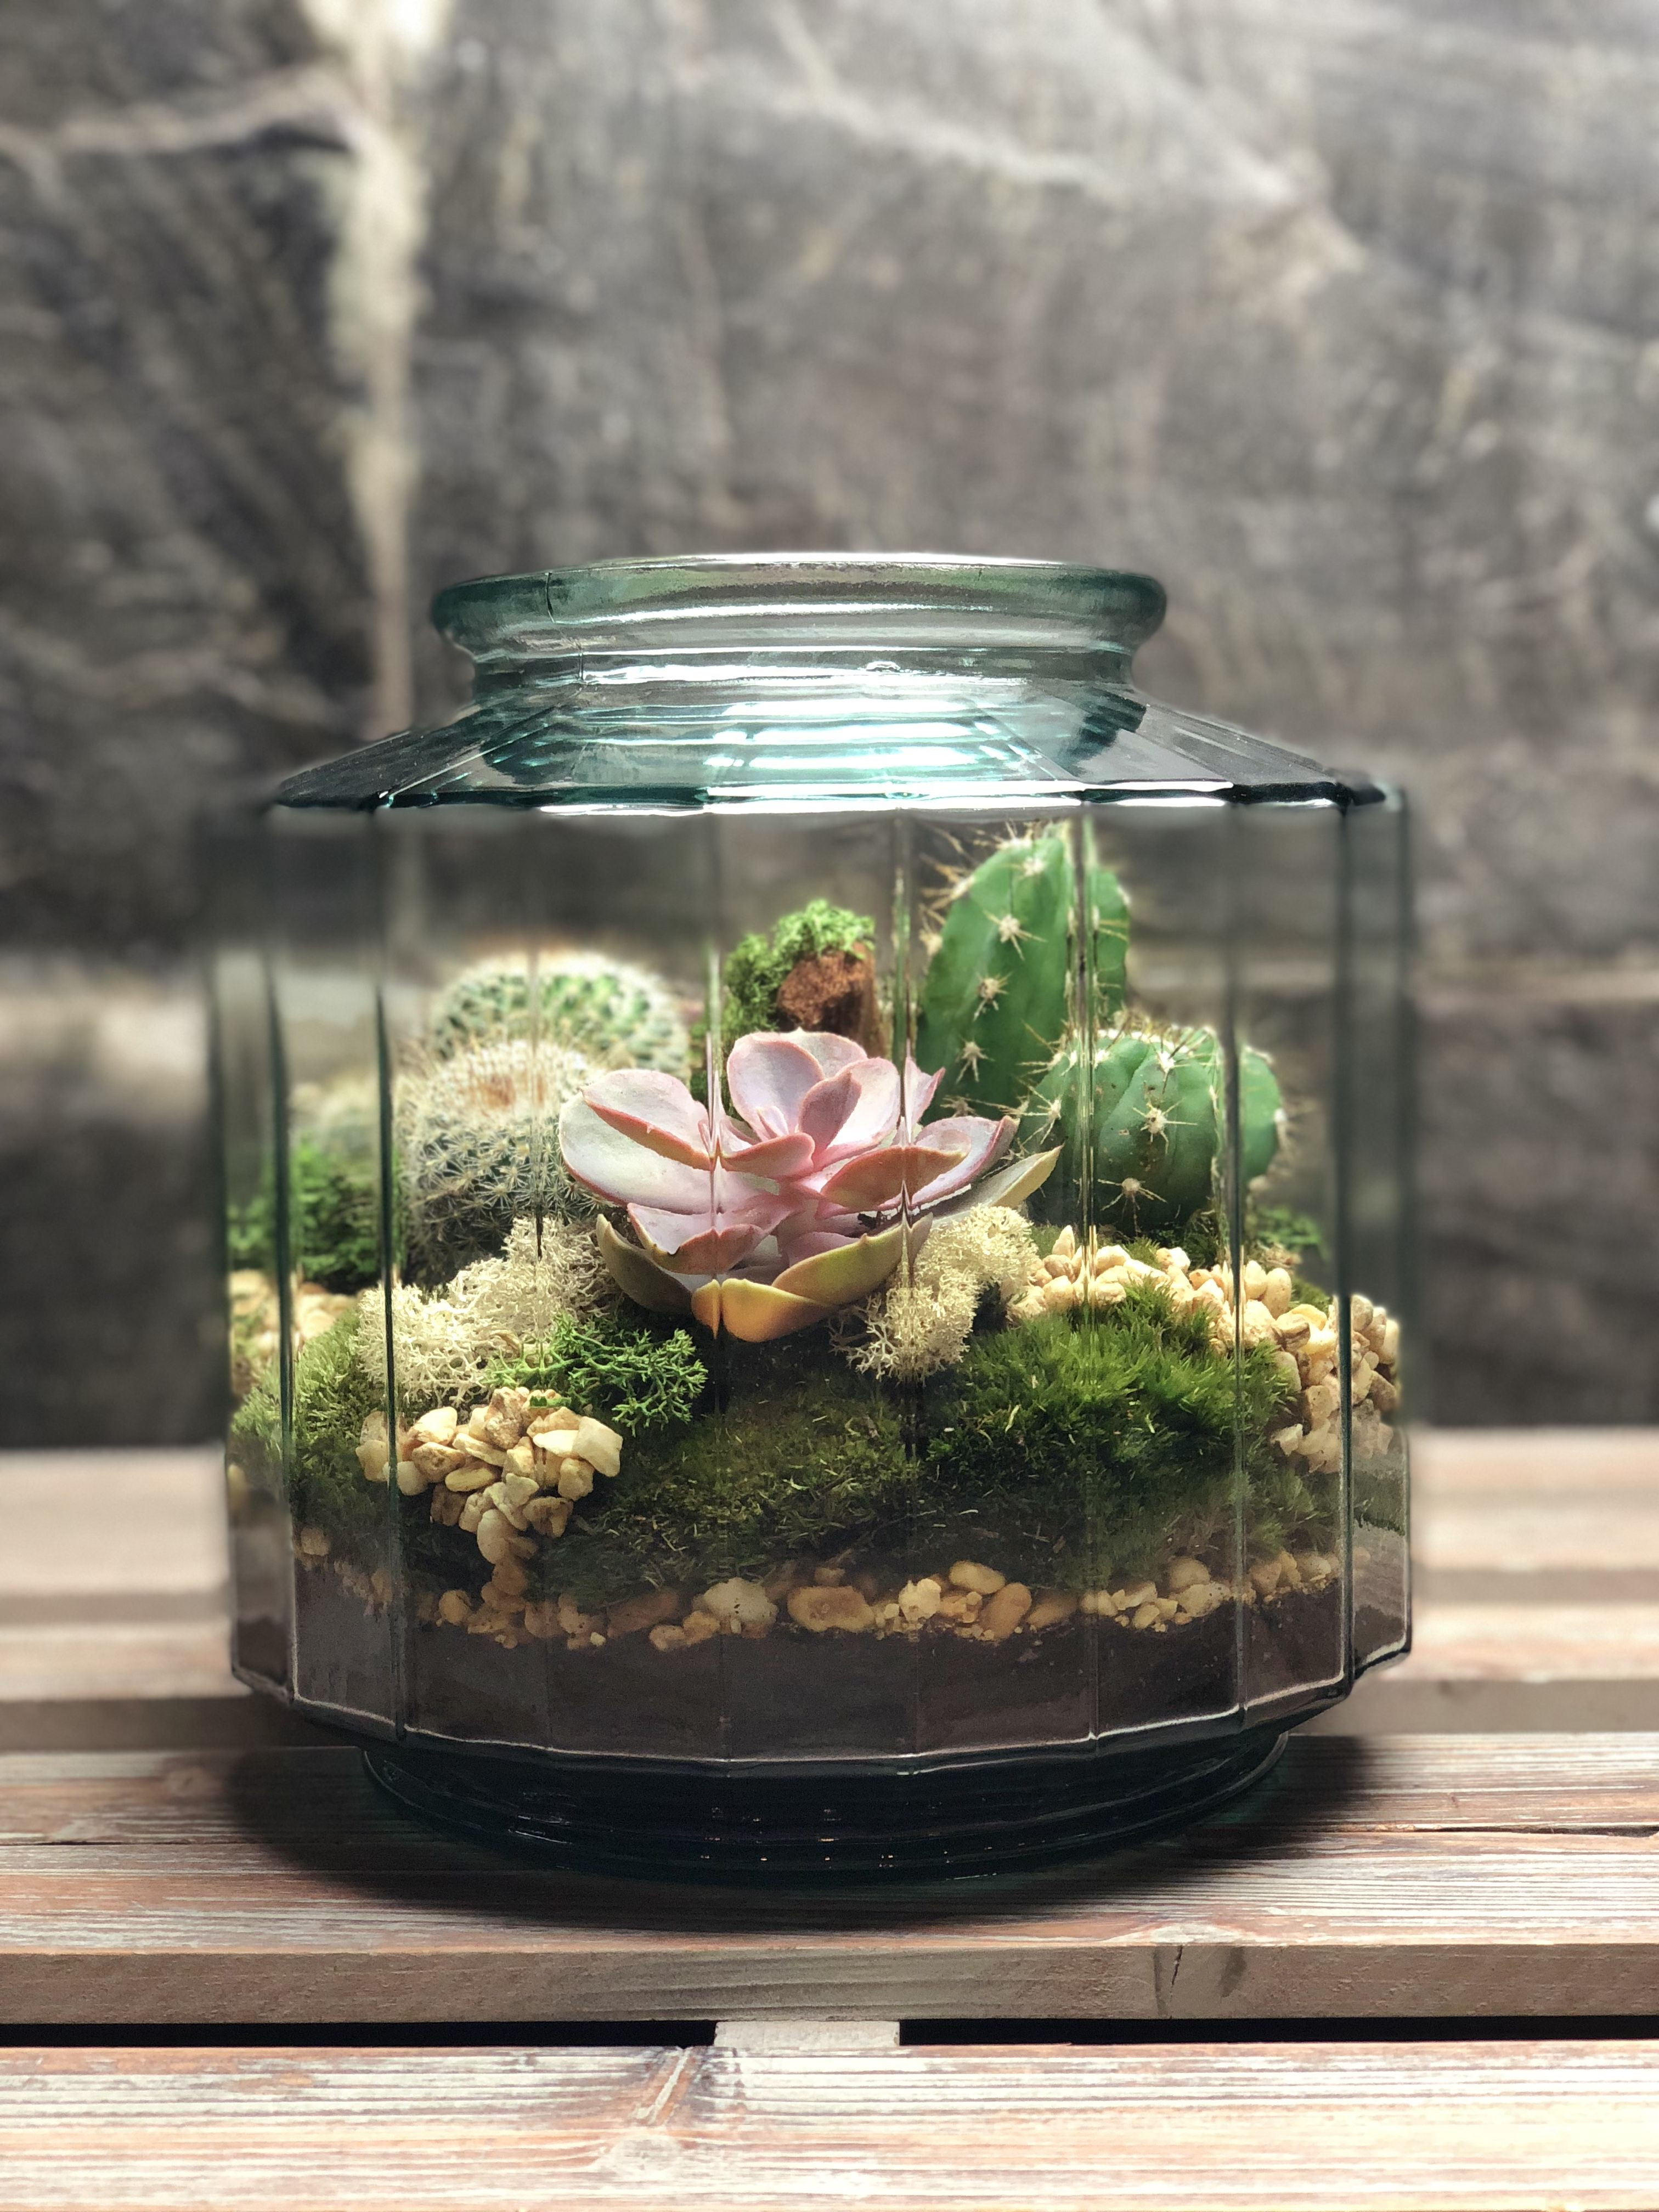 16 Fantastic Tulip Bulb Vase 2024 free download tulip bulb vase of what do you think about this type of vase for a terrarium yes or throughout what do you think about this type of vase for a terrarium yes or no